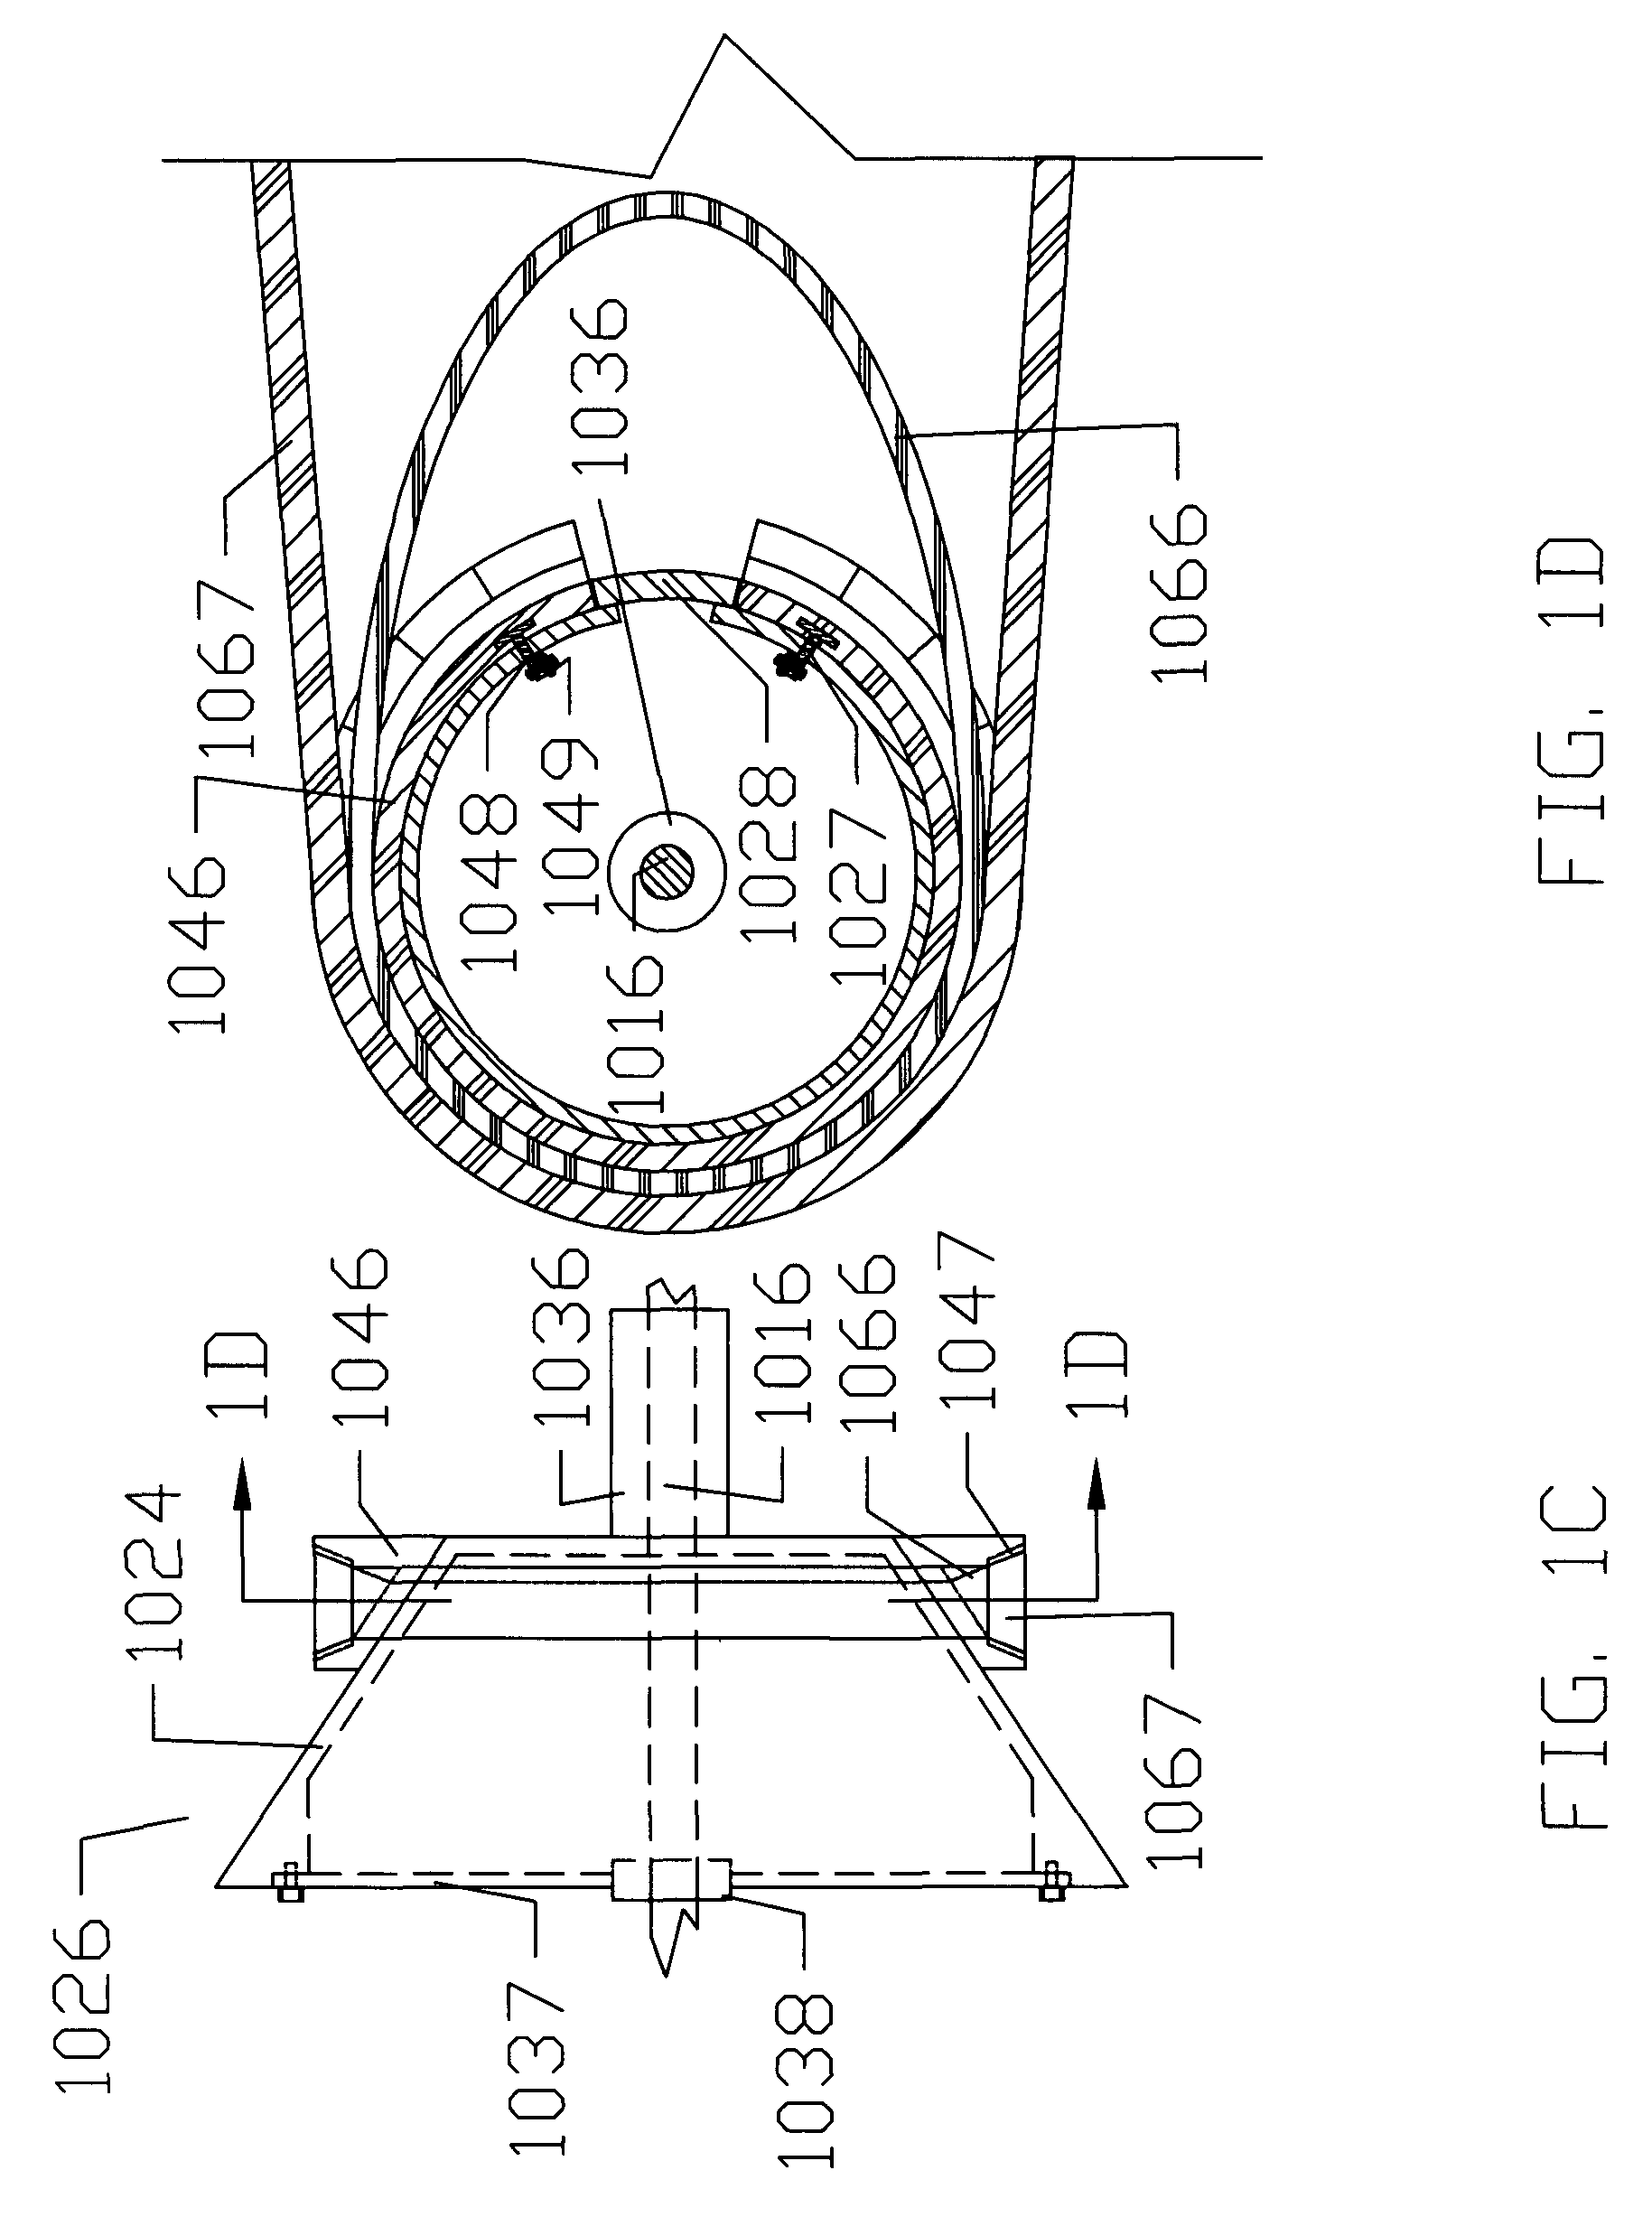 Cones, configurations, and adjusters for friction and non-friction dependent continuous variable transmissions